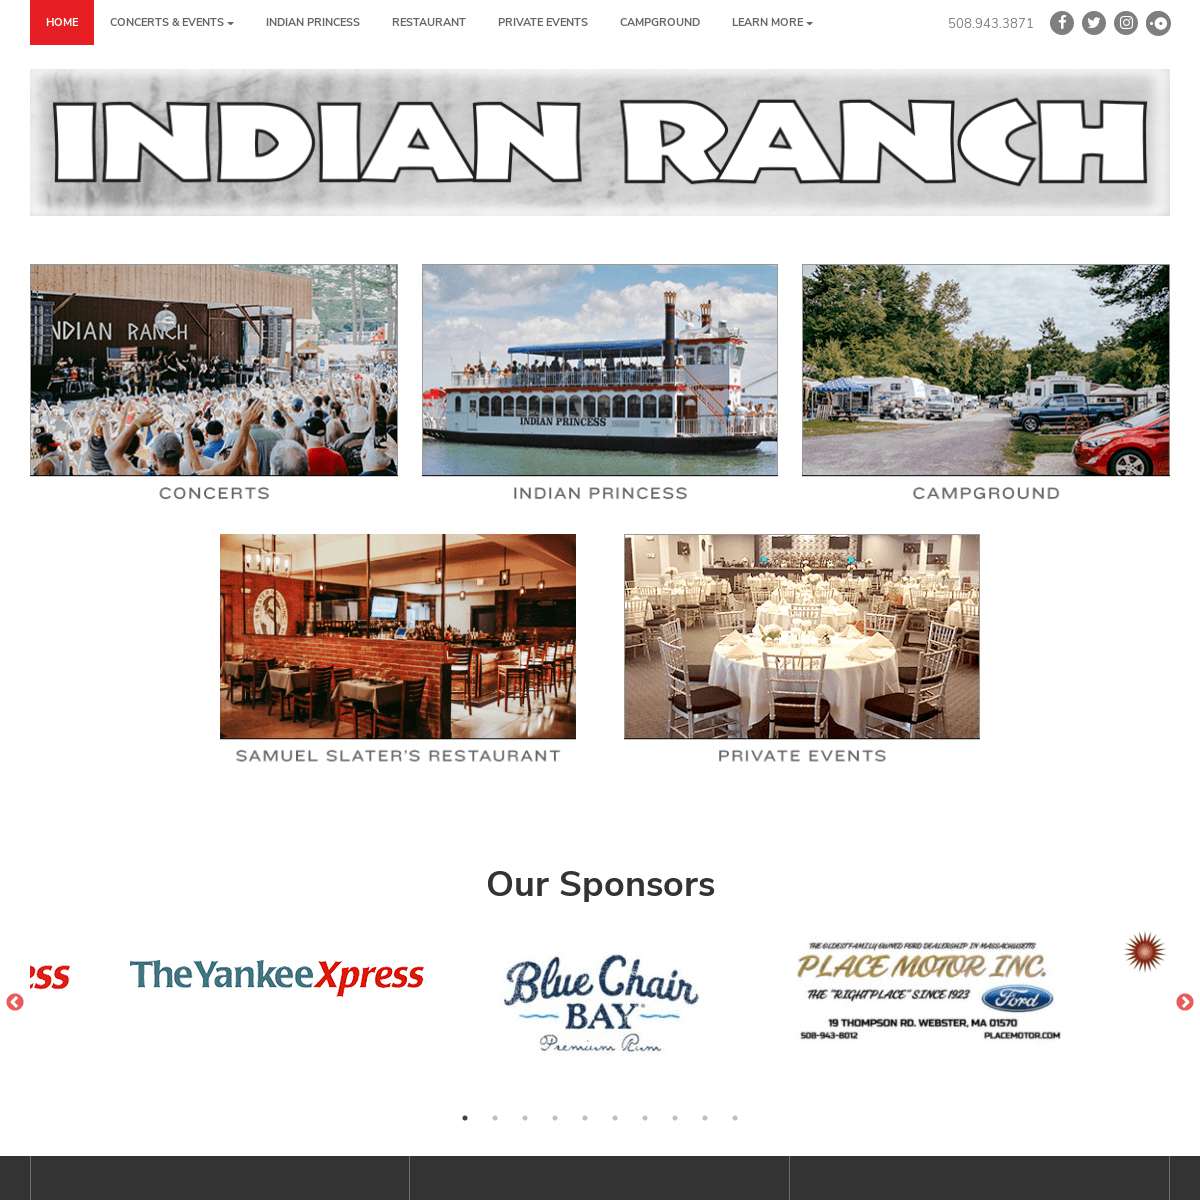 A complete backup of indianranch.com